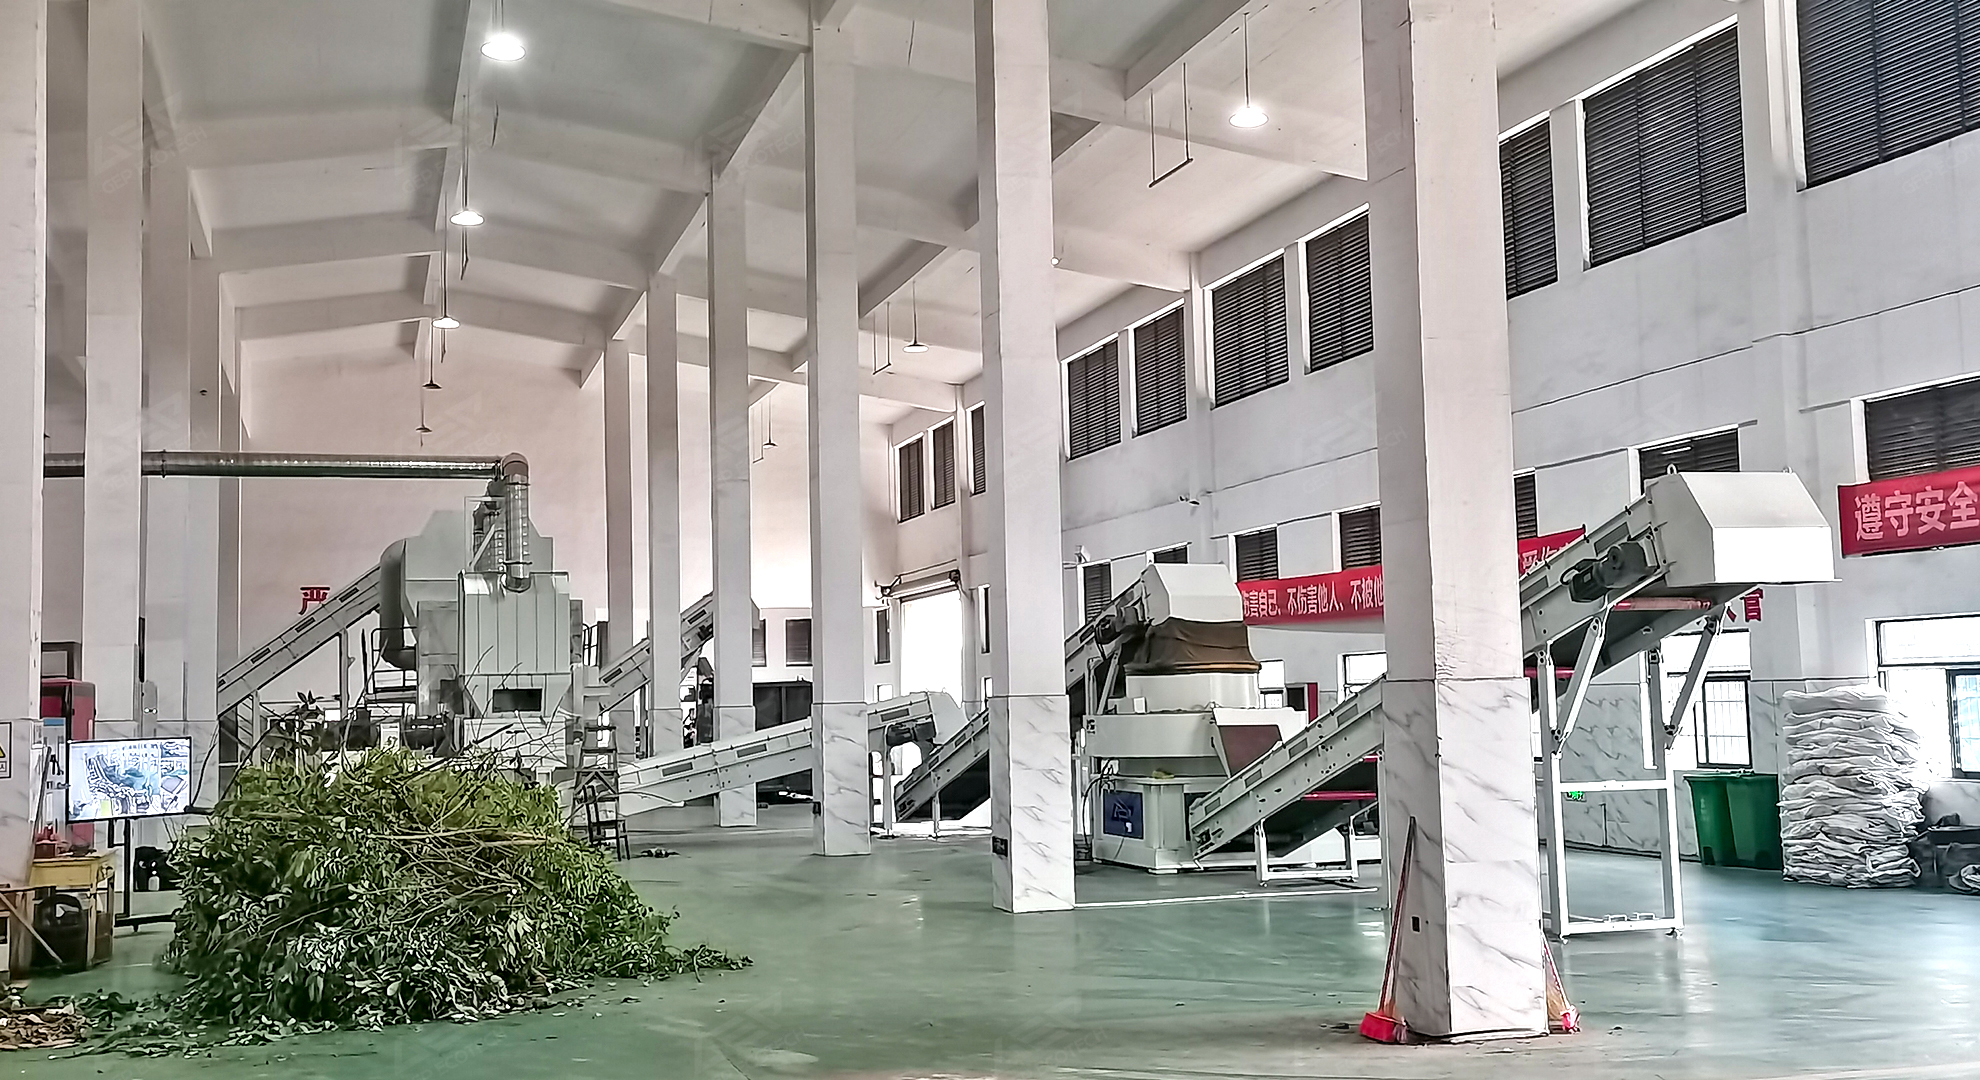 Processing Bulky Waste and Garden Waste to Produce Refuse-Derived Fuel (RDF) in Jiangxi, China